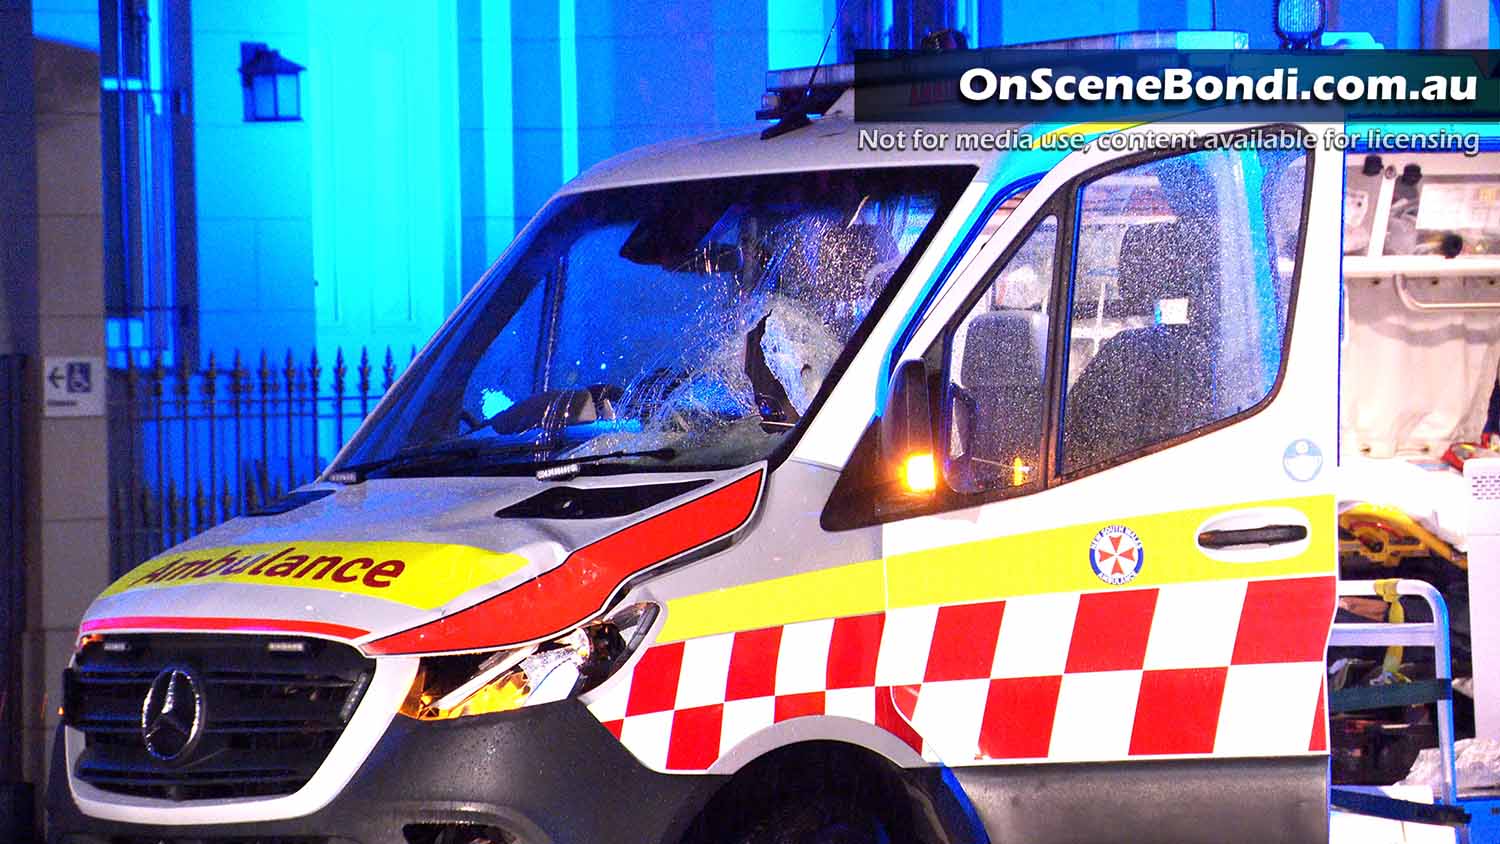 Man in critical condition after NSW Ambulance collides with pedestrian in Surry Hills